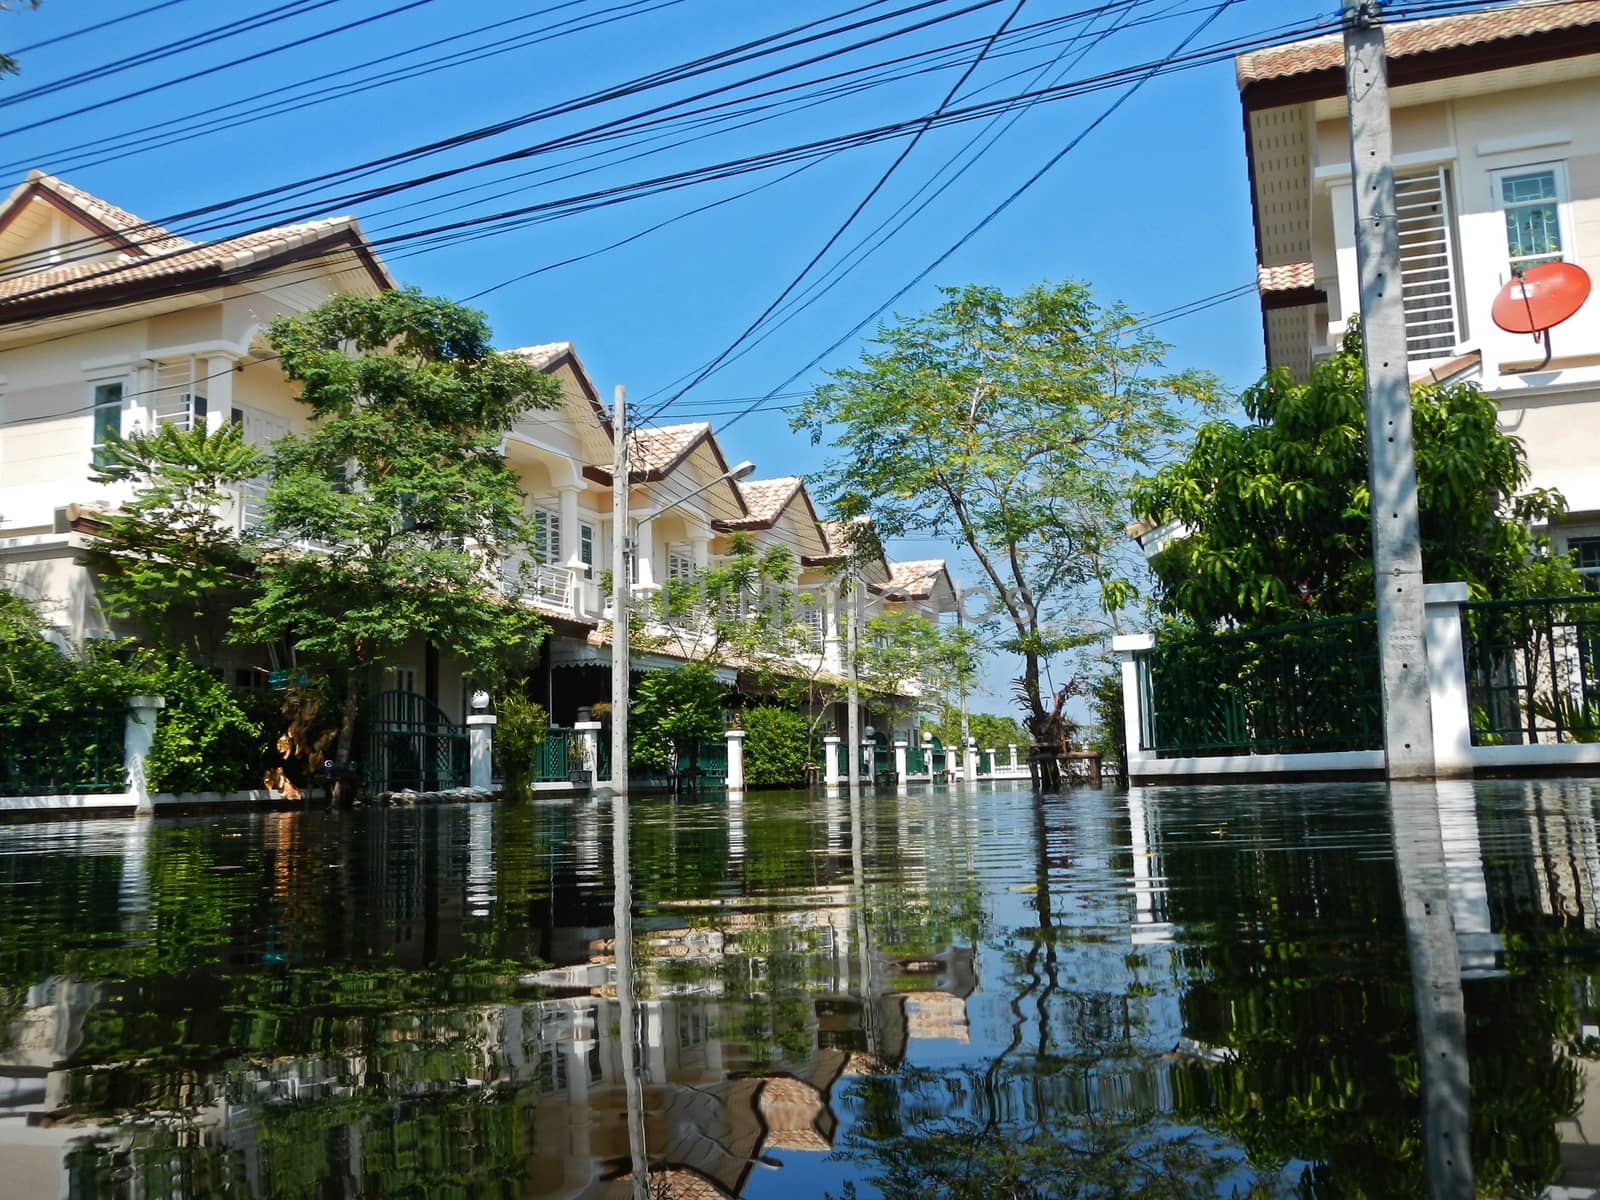 flood waters overtake a house in Thailand